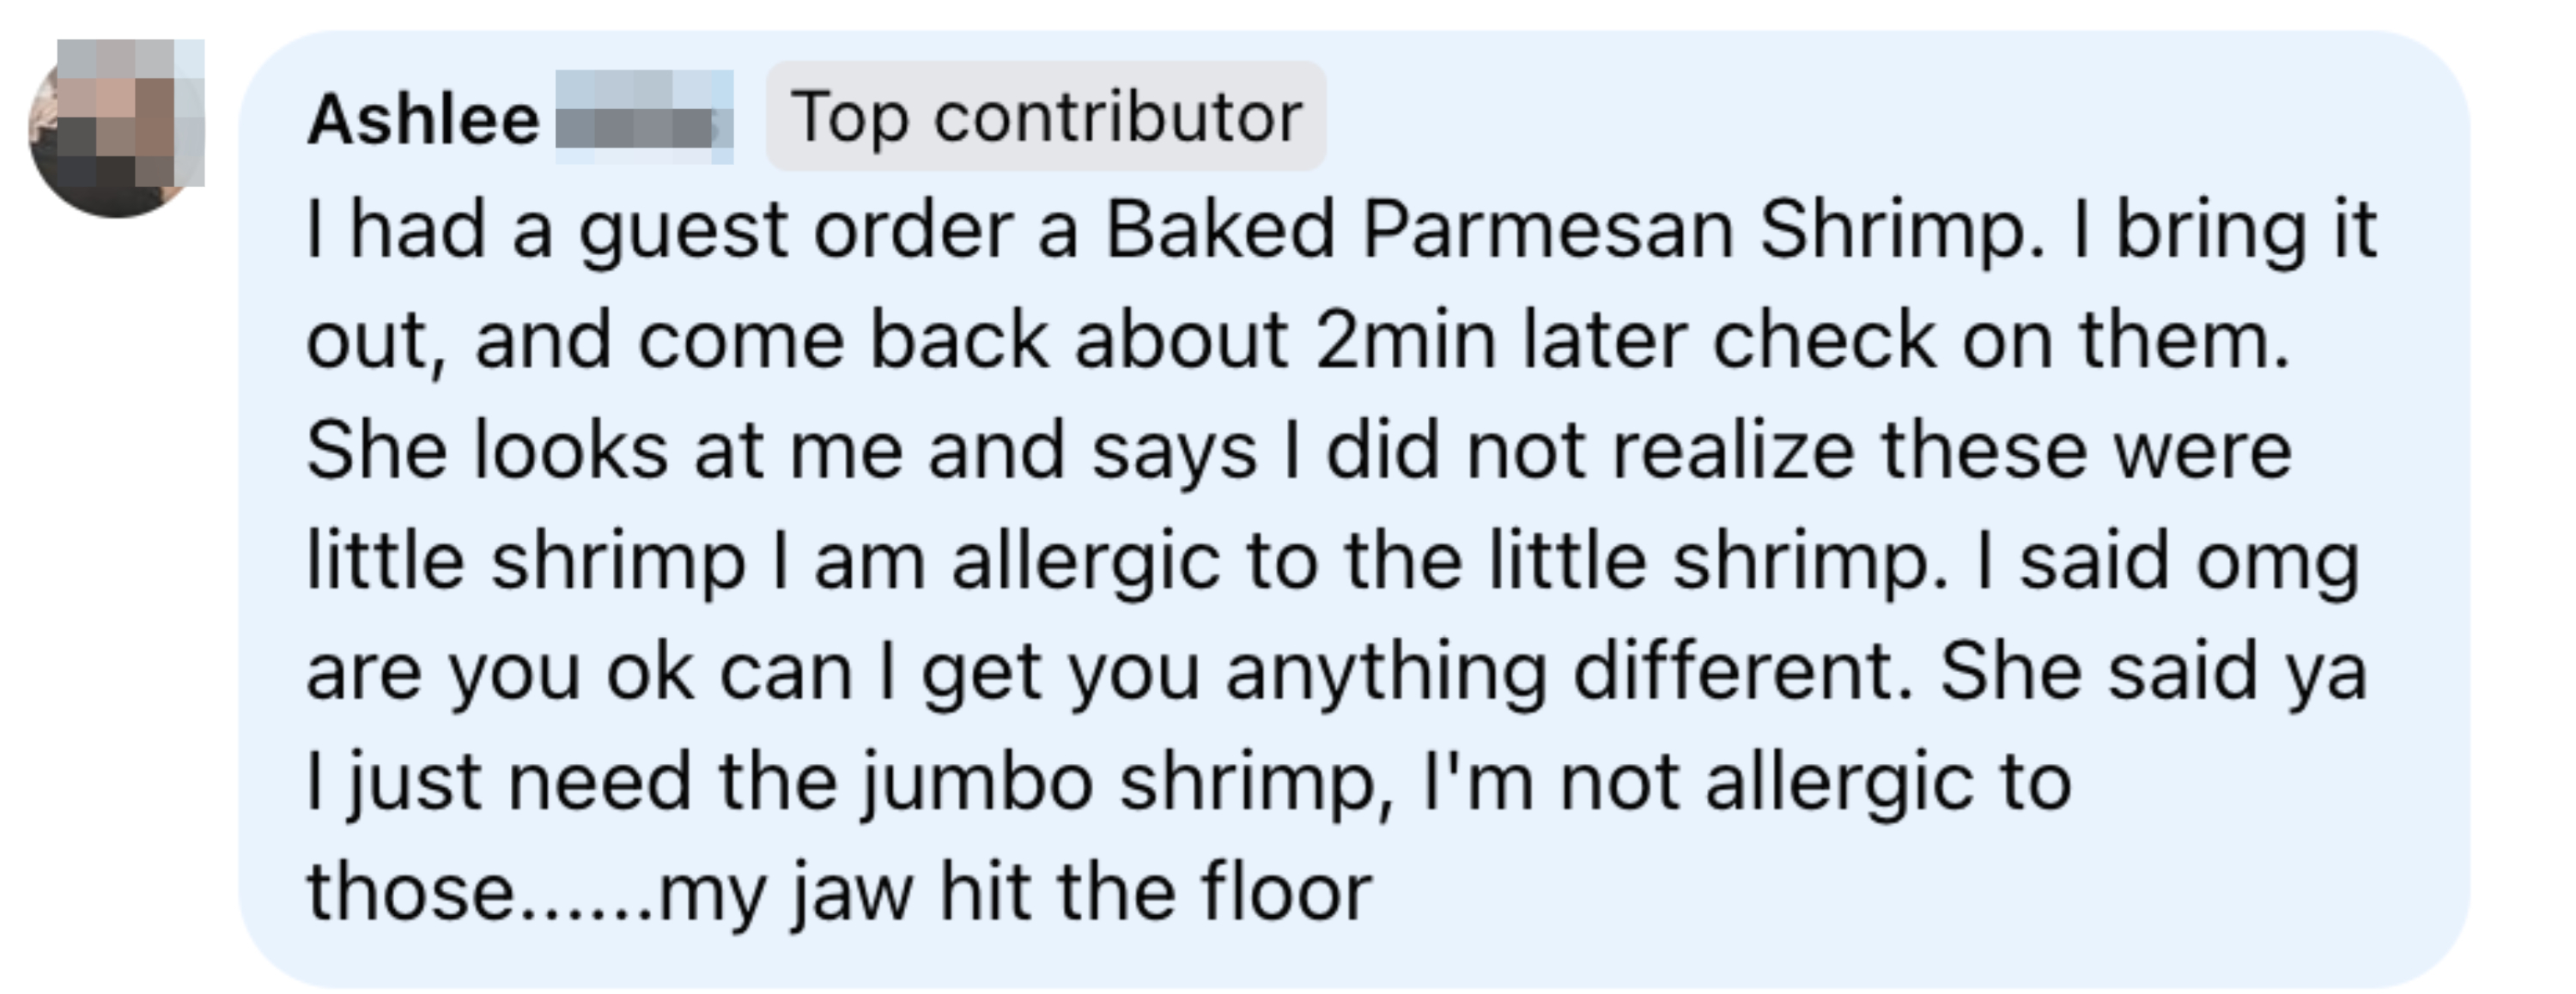 A Facebook post sharing a story about a guest who ordered Baked Parmesan Shrimp and later said they were allergic to small shrimp